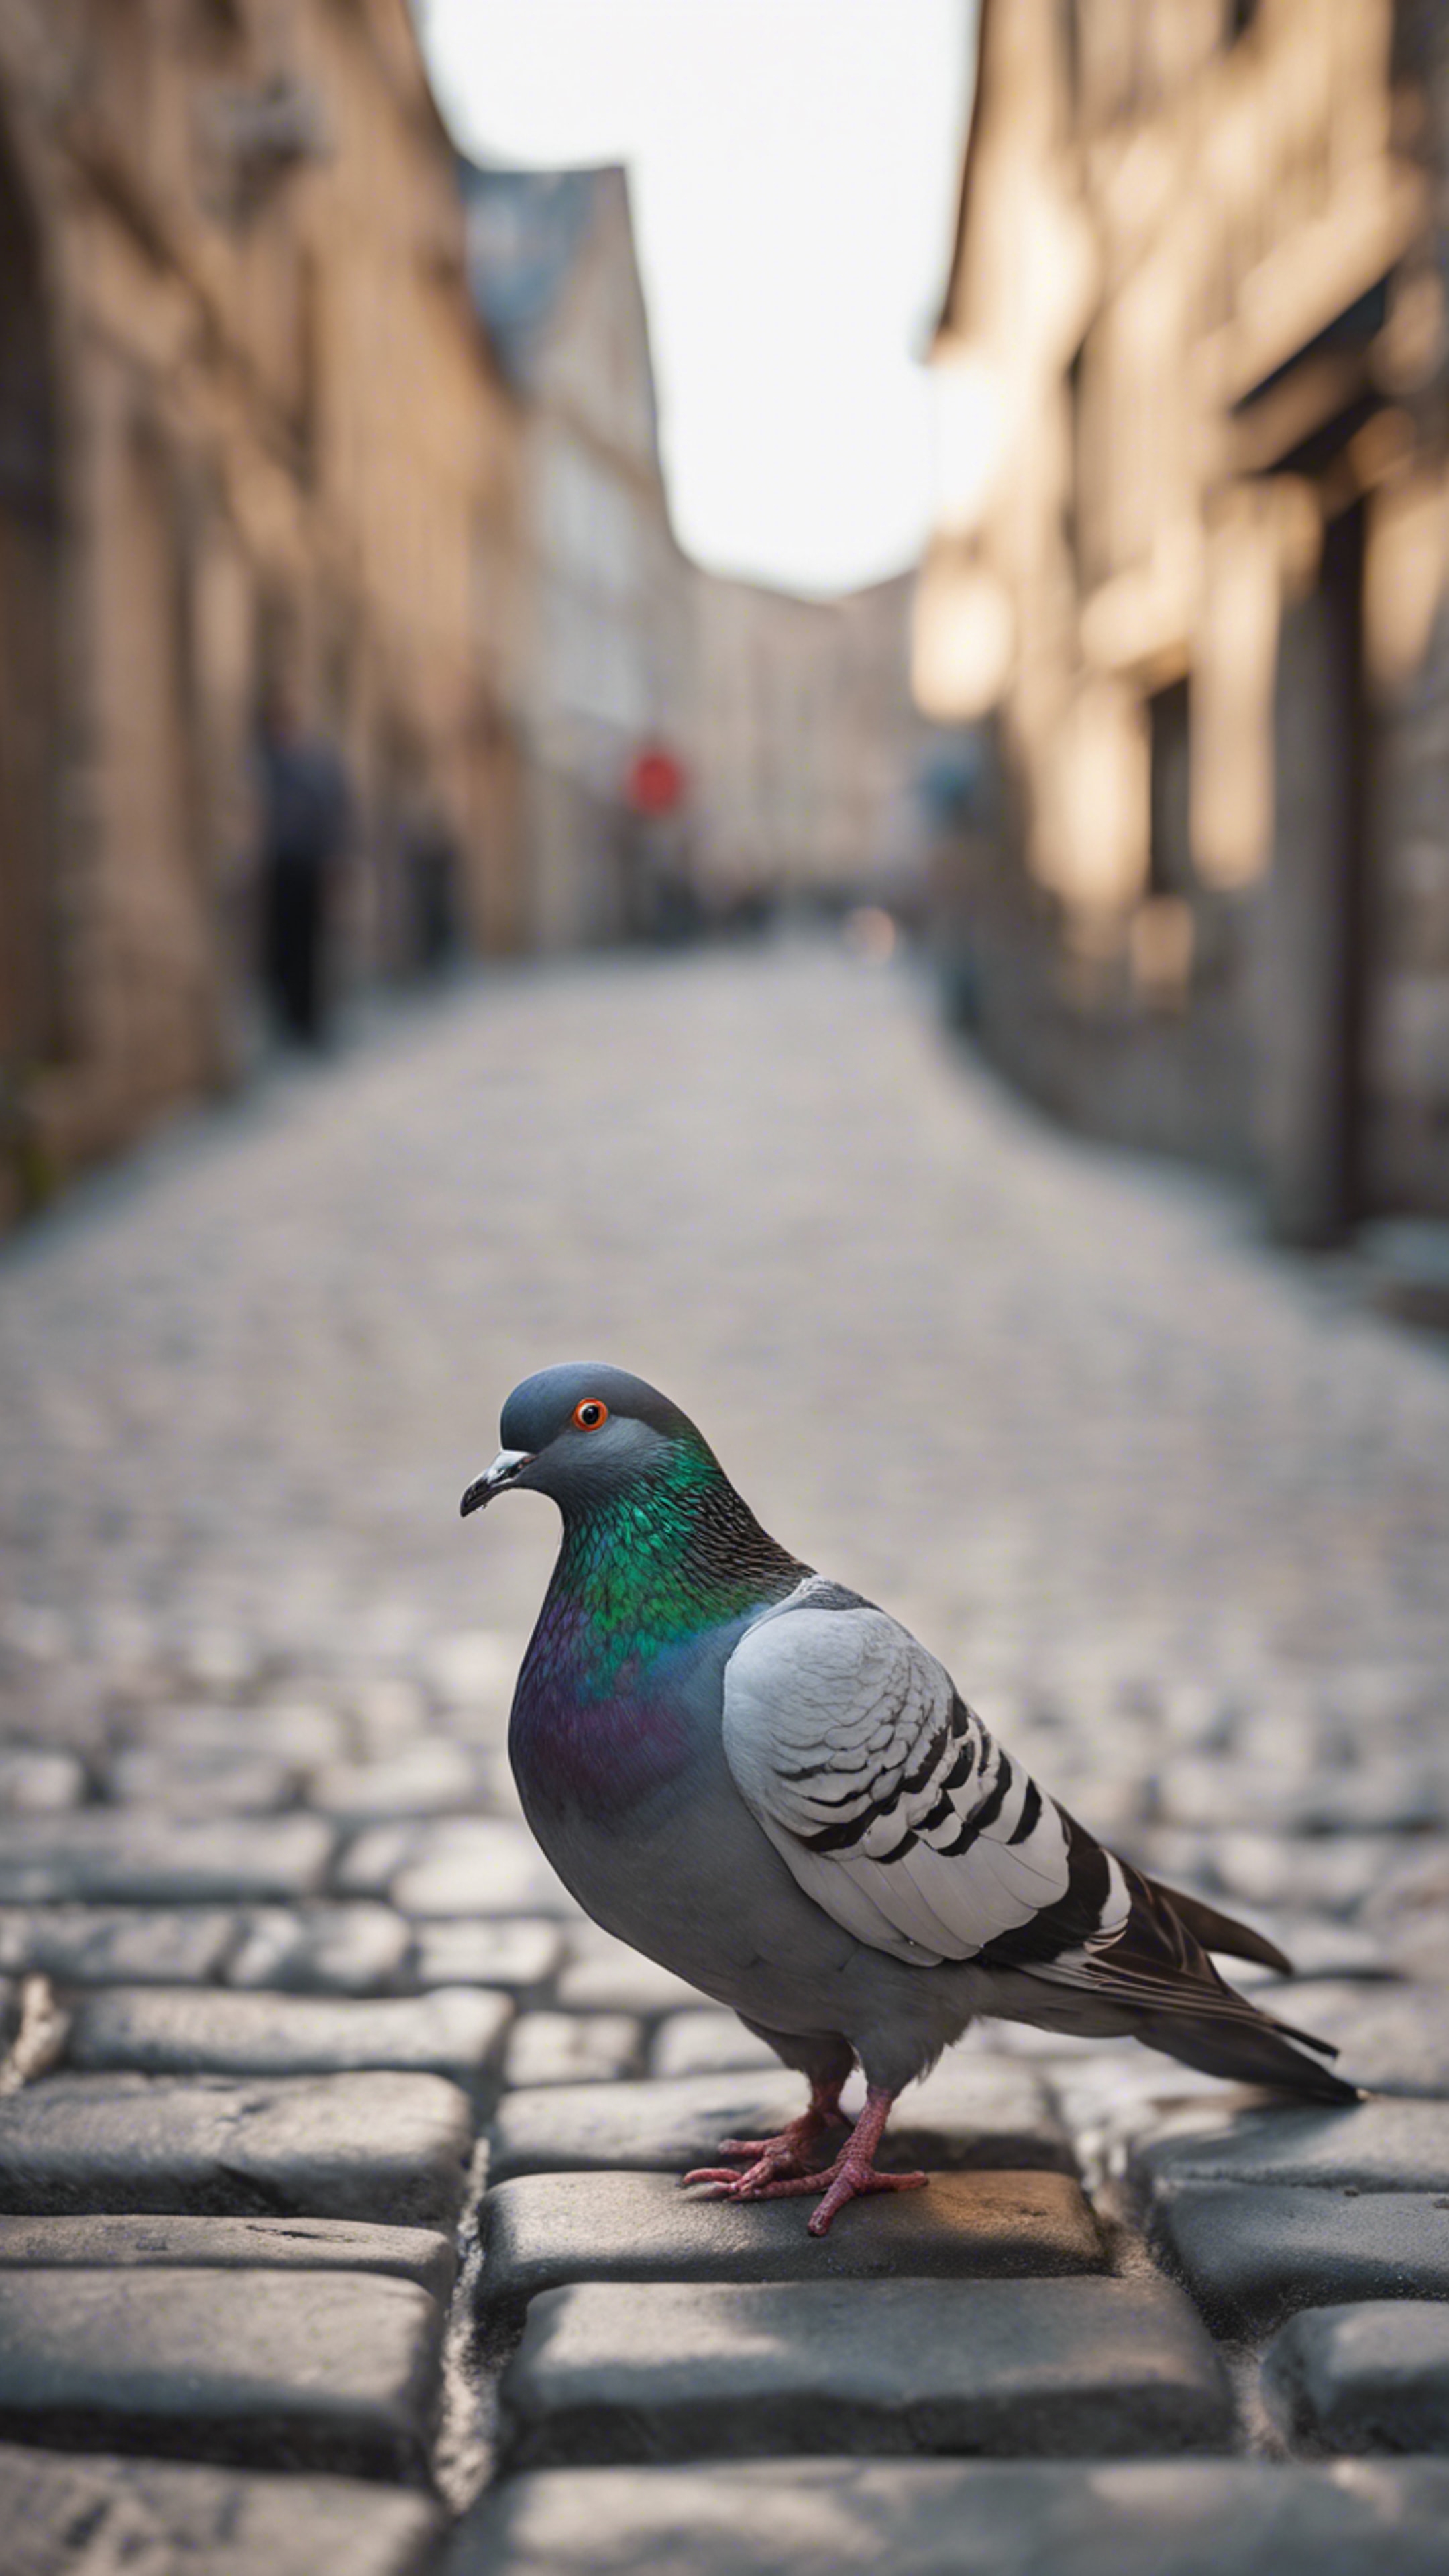 A pigeon standing on cobblestone street in the middle of an old city, its beautiful light gray plumage glistening. Tapéta[03a93bb4226c4140ad33]